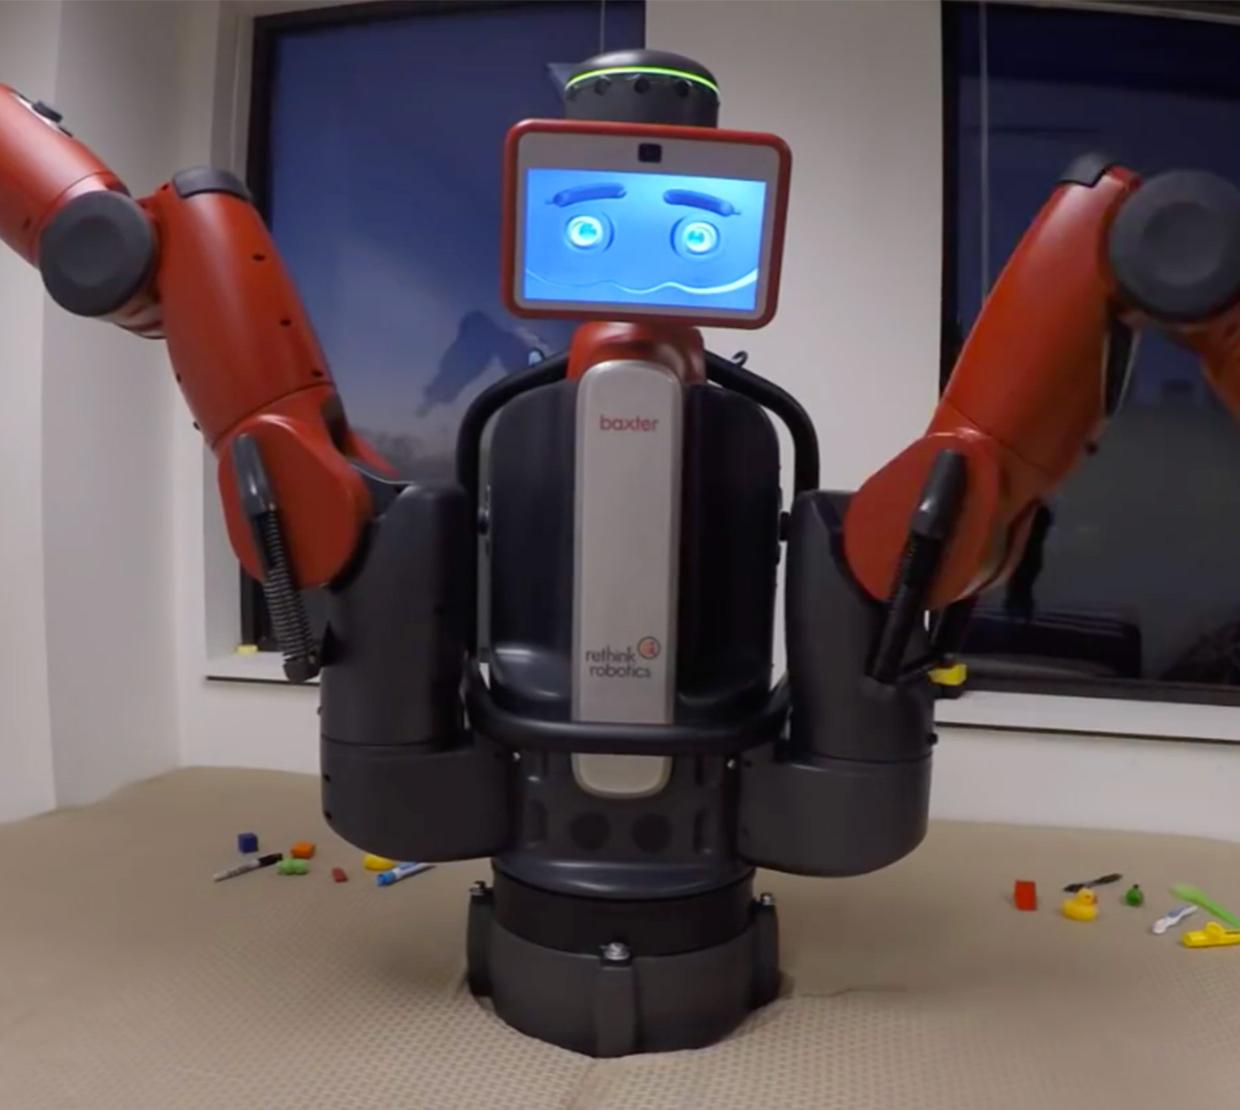 Robot with long arms sitting on office table